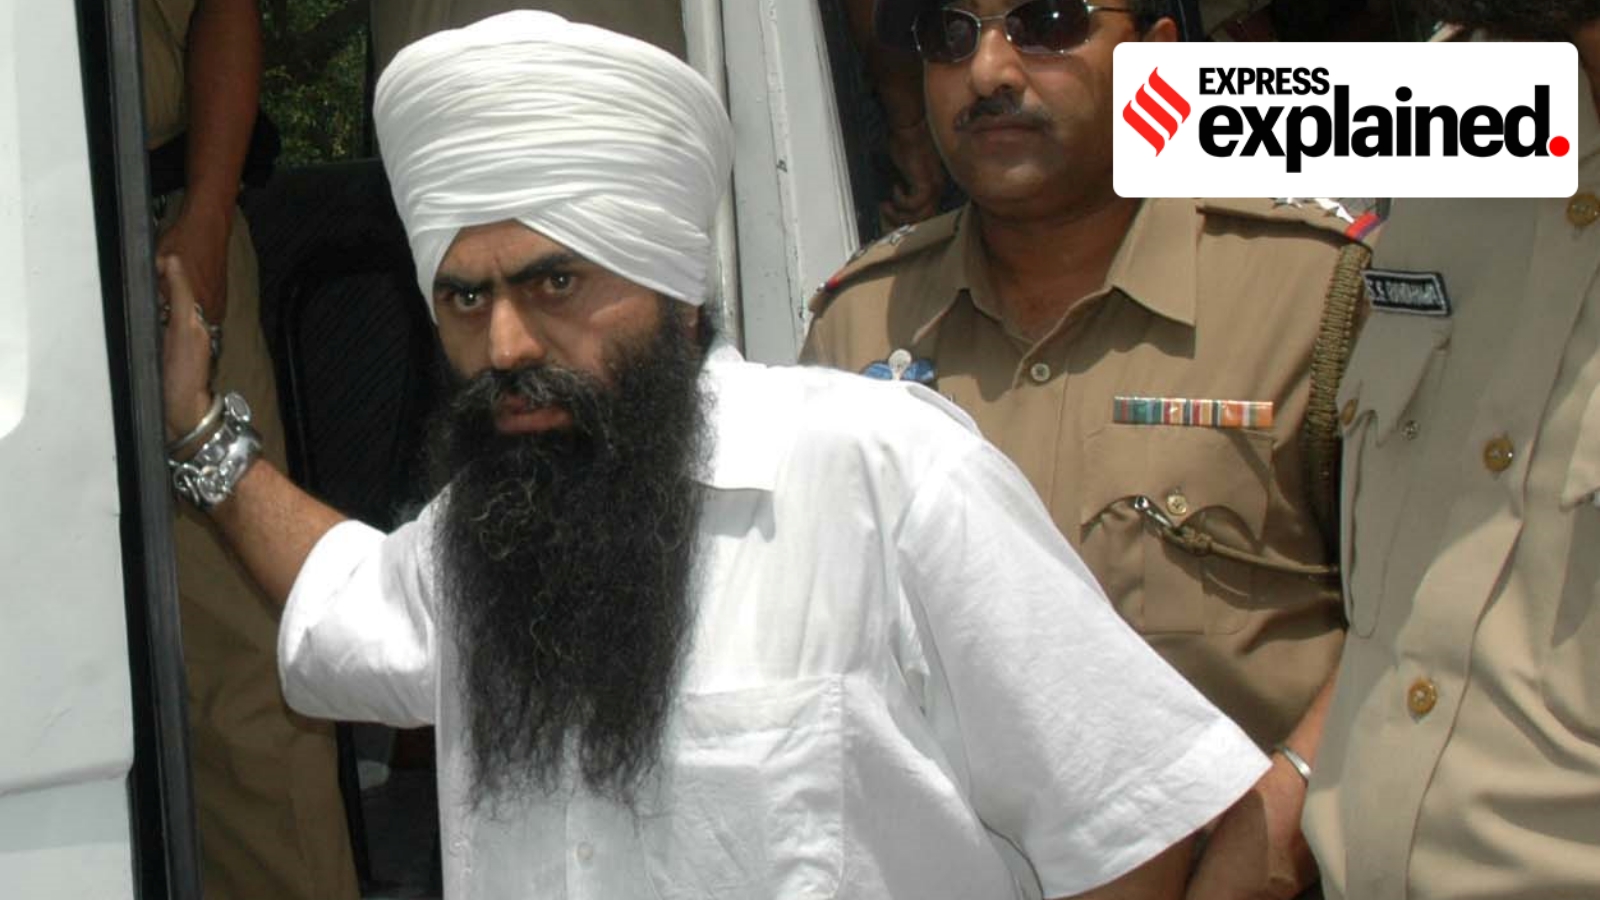 android, who is devinder pal bhullar, in jail for terror since 1995?